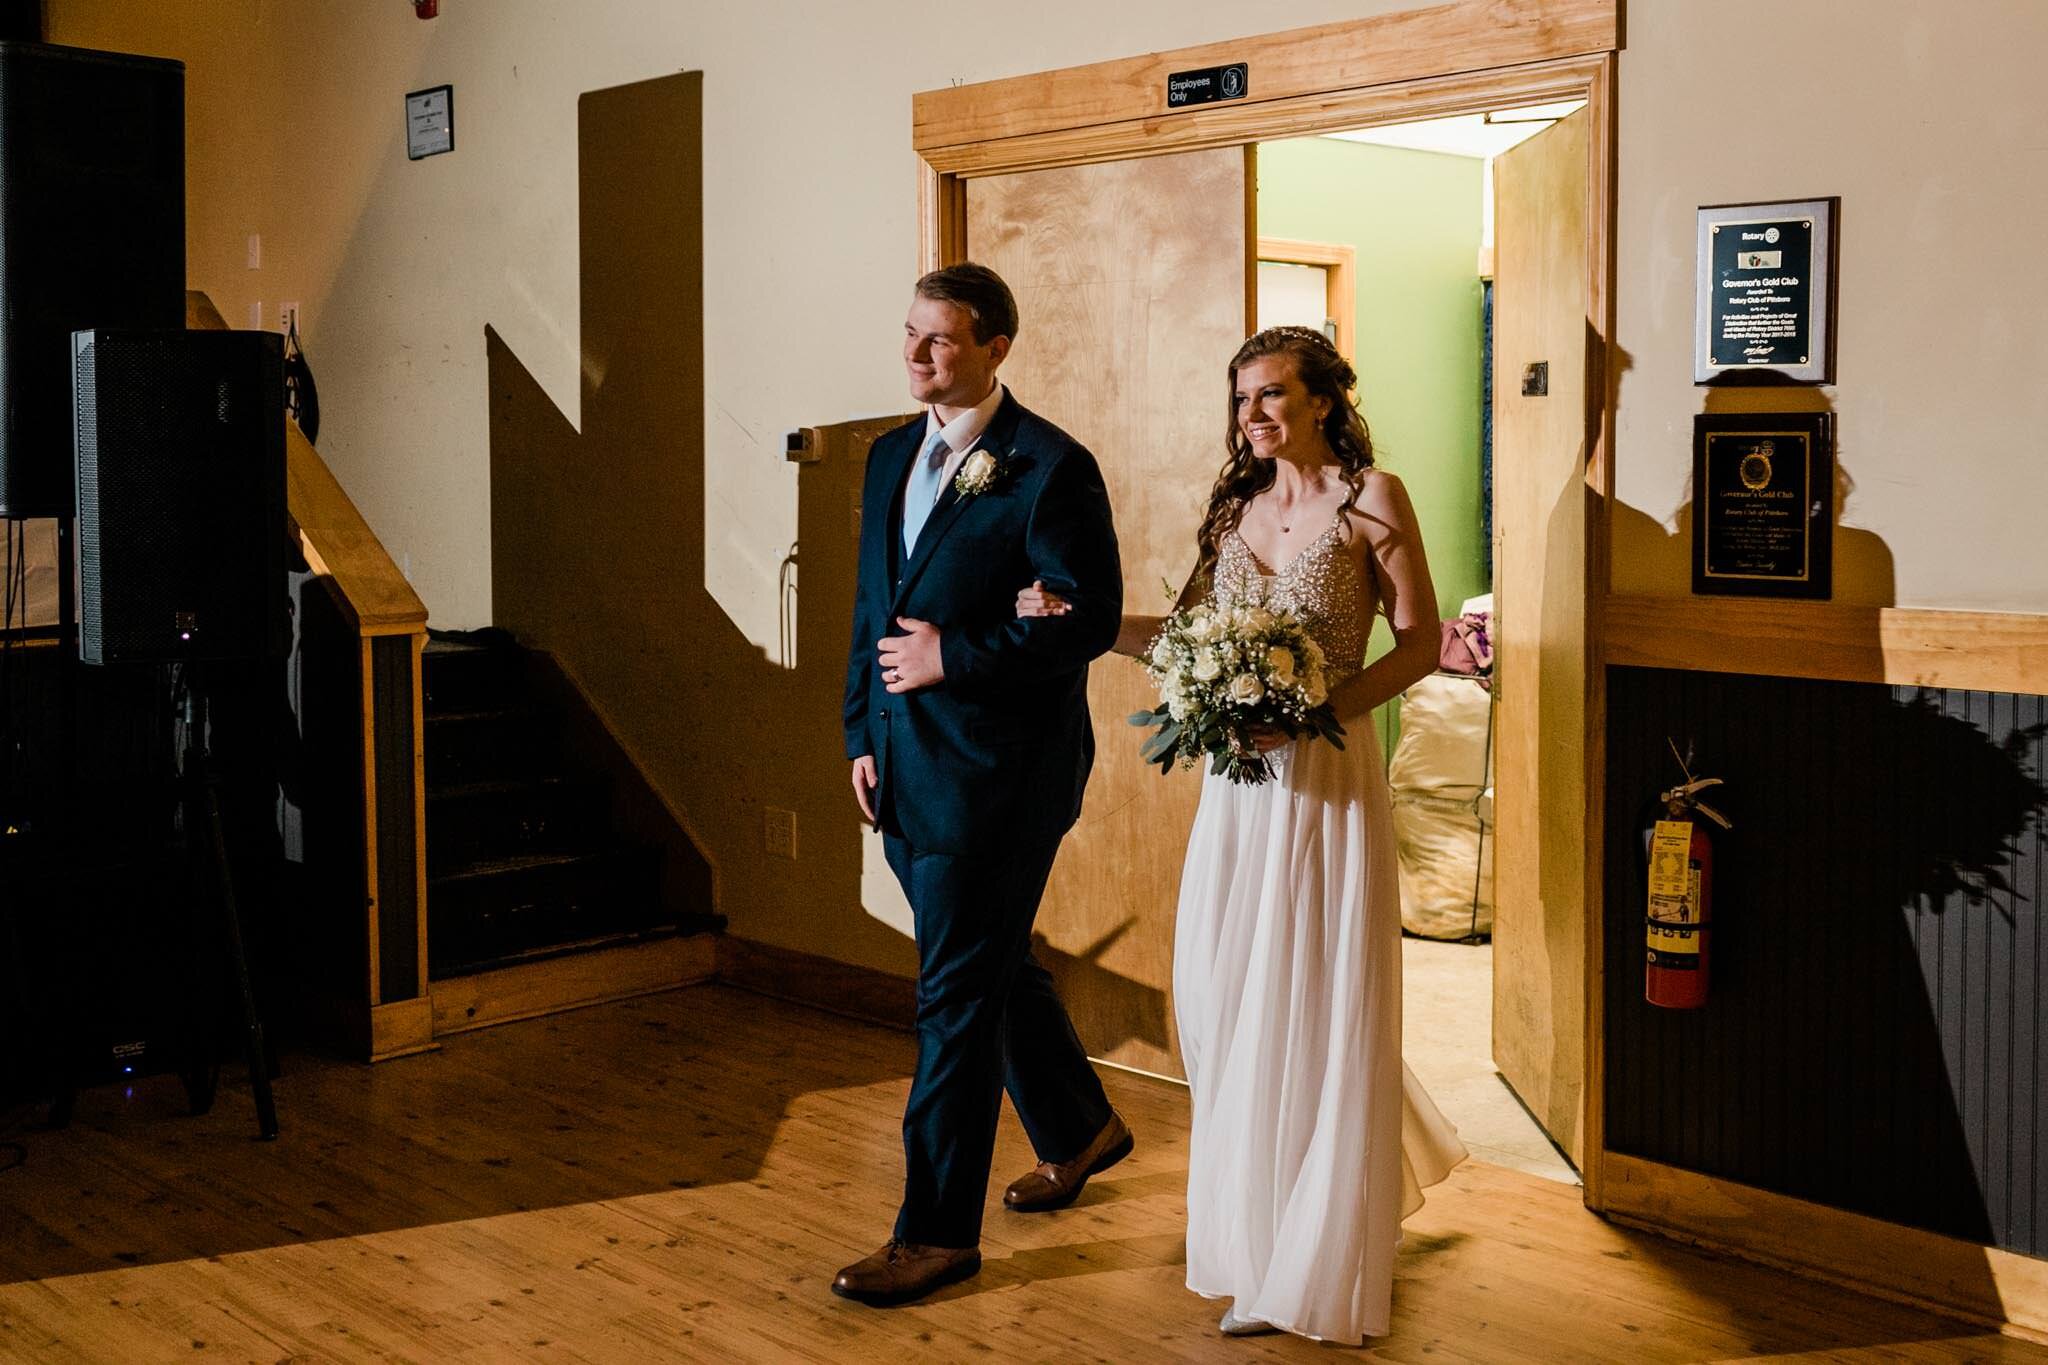 Durham Wedding Photographer | By G. Lin Photography | Presentation of bride and groom